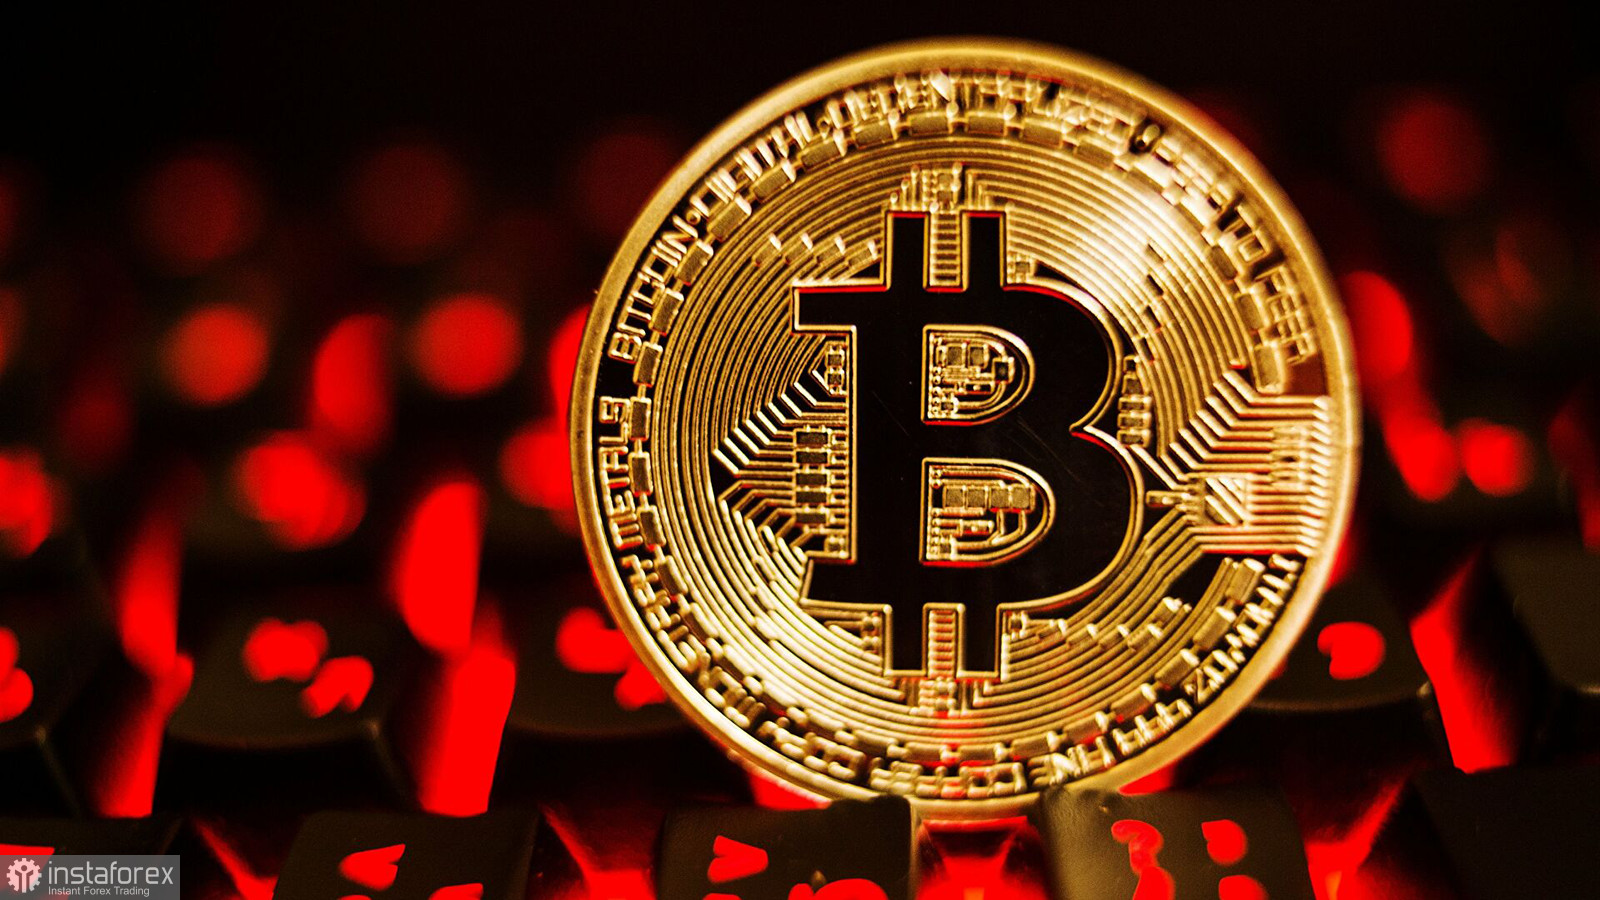 Carl Icahn: Bitcoin's value will grow in proportion to inflation